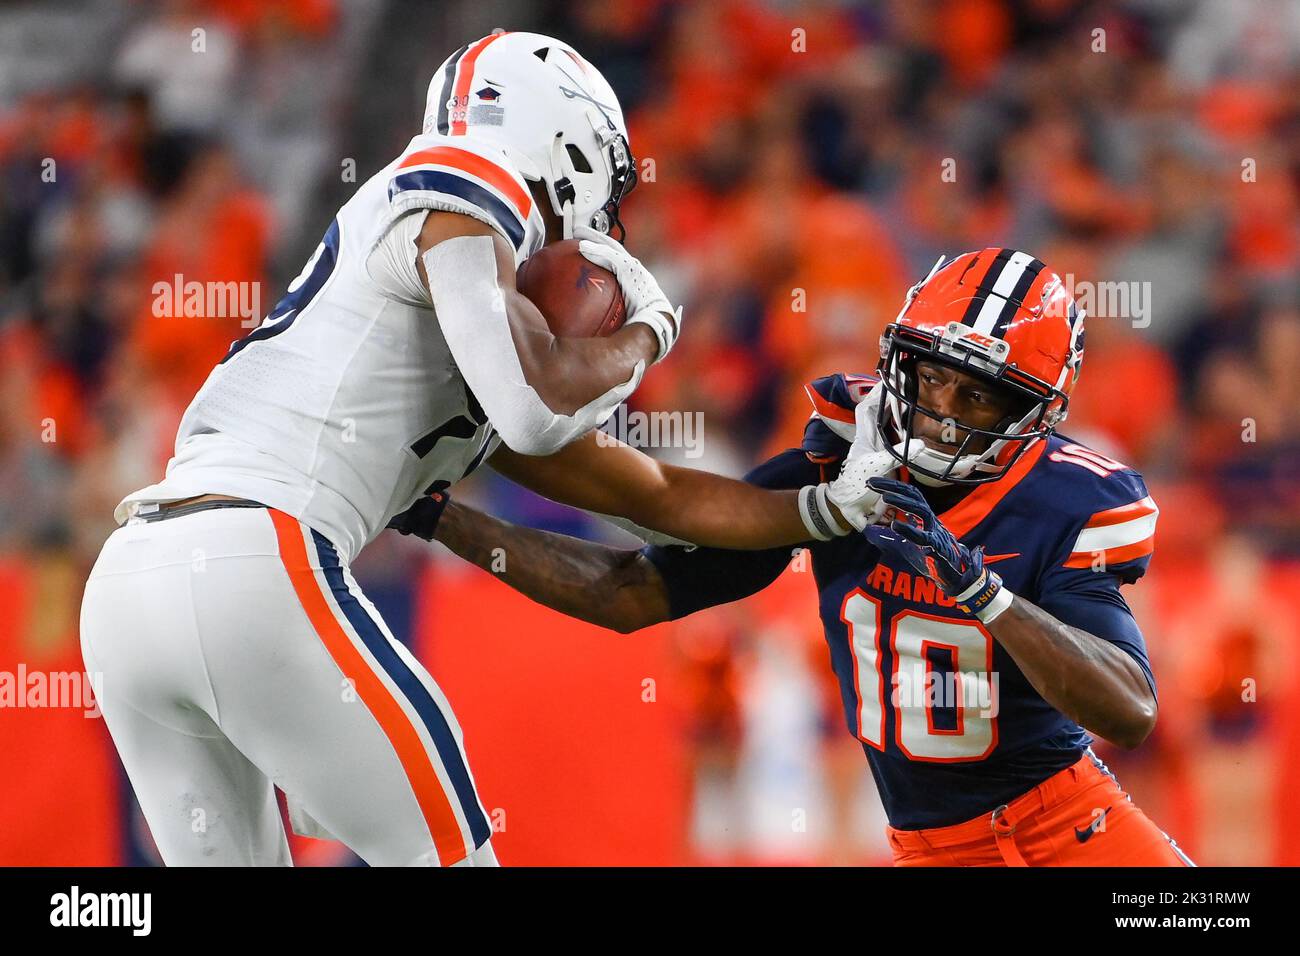 September 23, 2022: Virginia Cavaliers wide receiver Keytaon Thompson (99) stiff-arms Syracuse Orange defensive back Alijah Clark (10) while running with the ball during the second half on Friday, Sep., 23, 2022 at the JMA Wireless Dome in Syracuse, New York. Rich Barnes/CSM Stock Photo